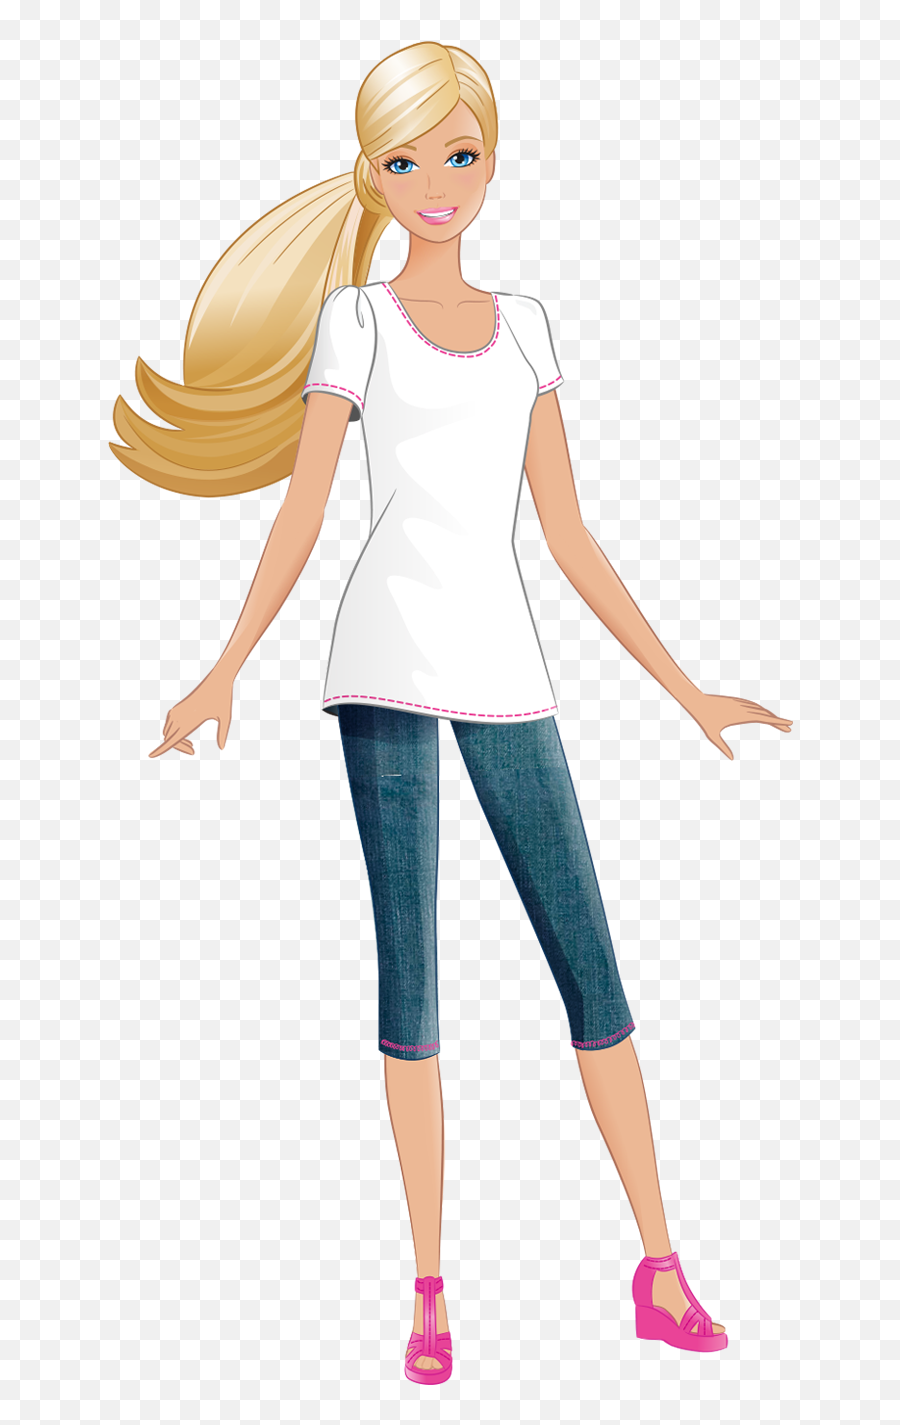 Download Barbie Png Image For Free - Cartoon Images Of Barbie,Barbie Png